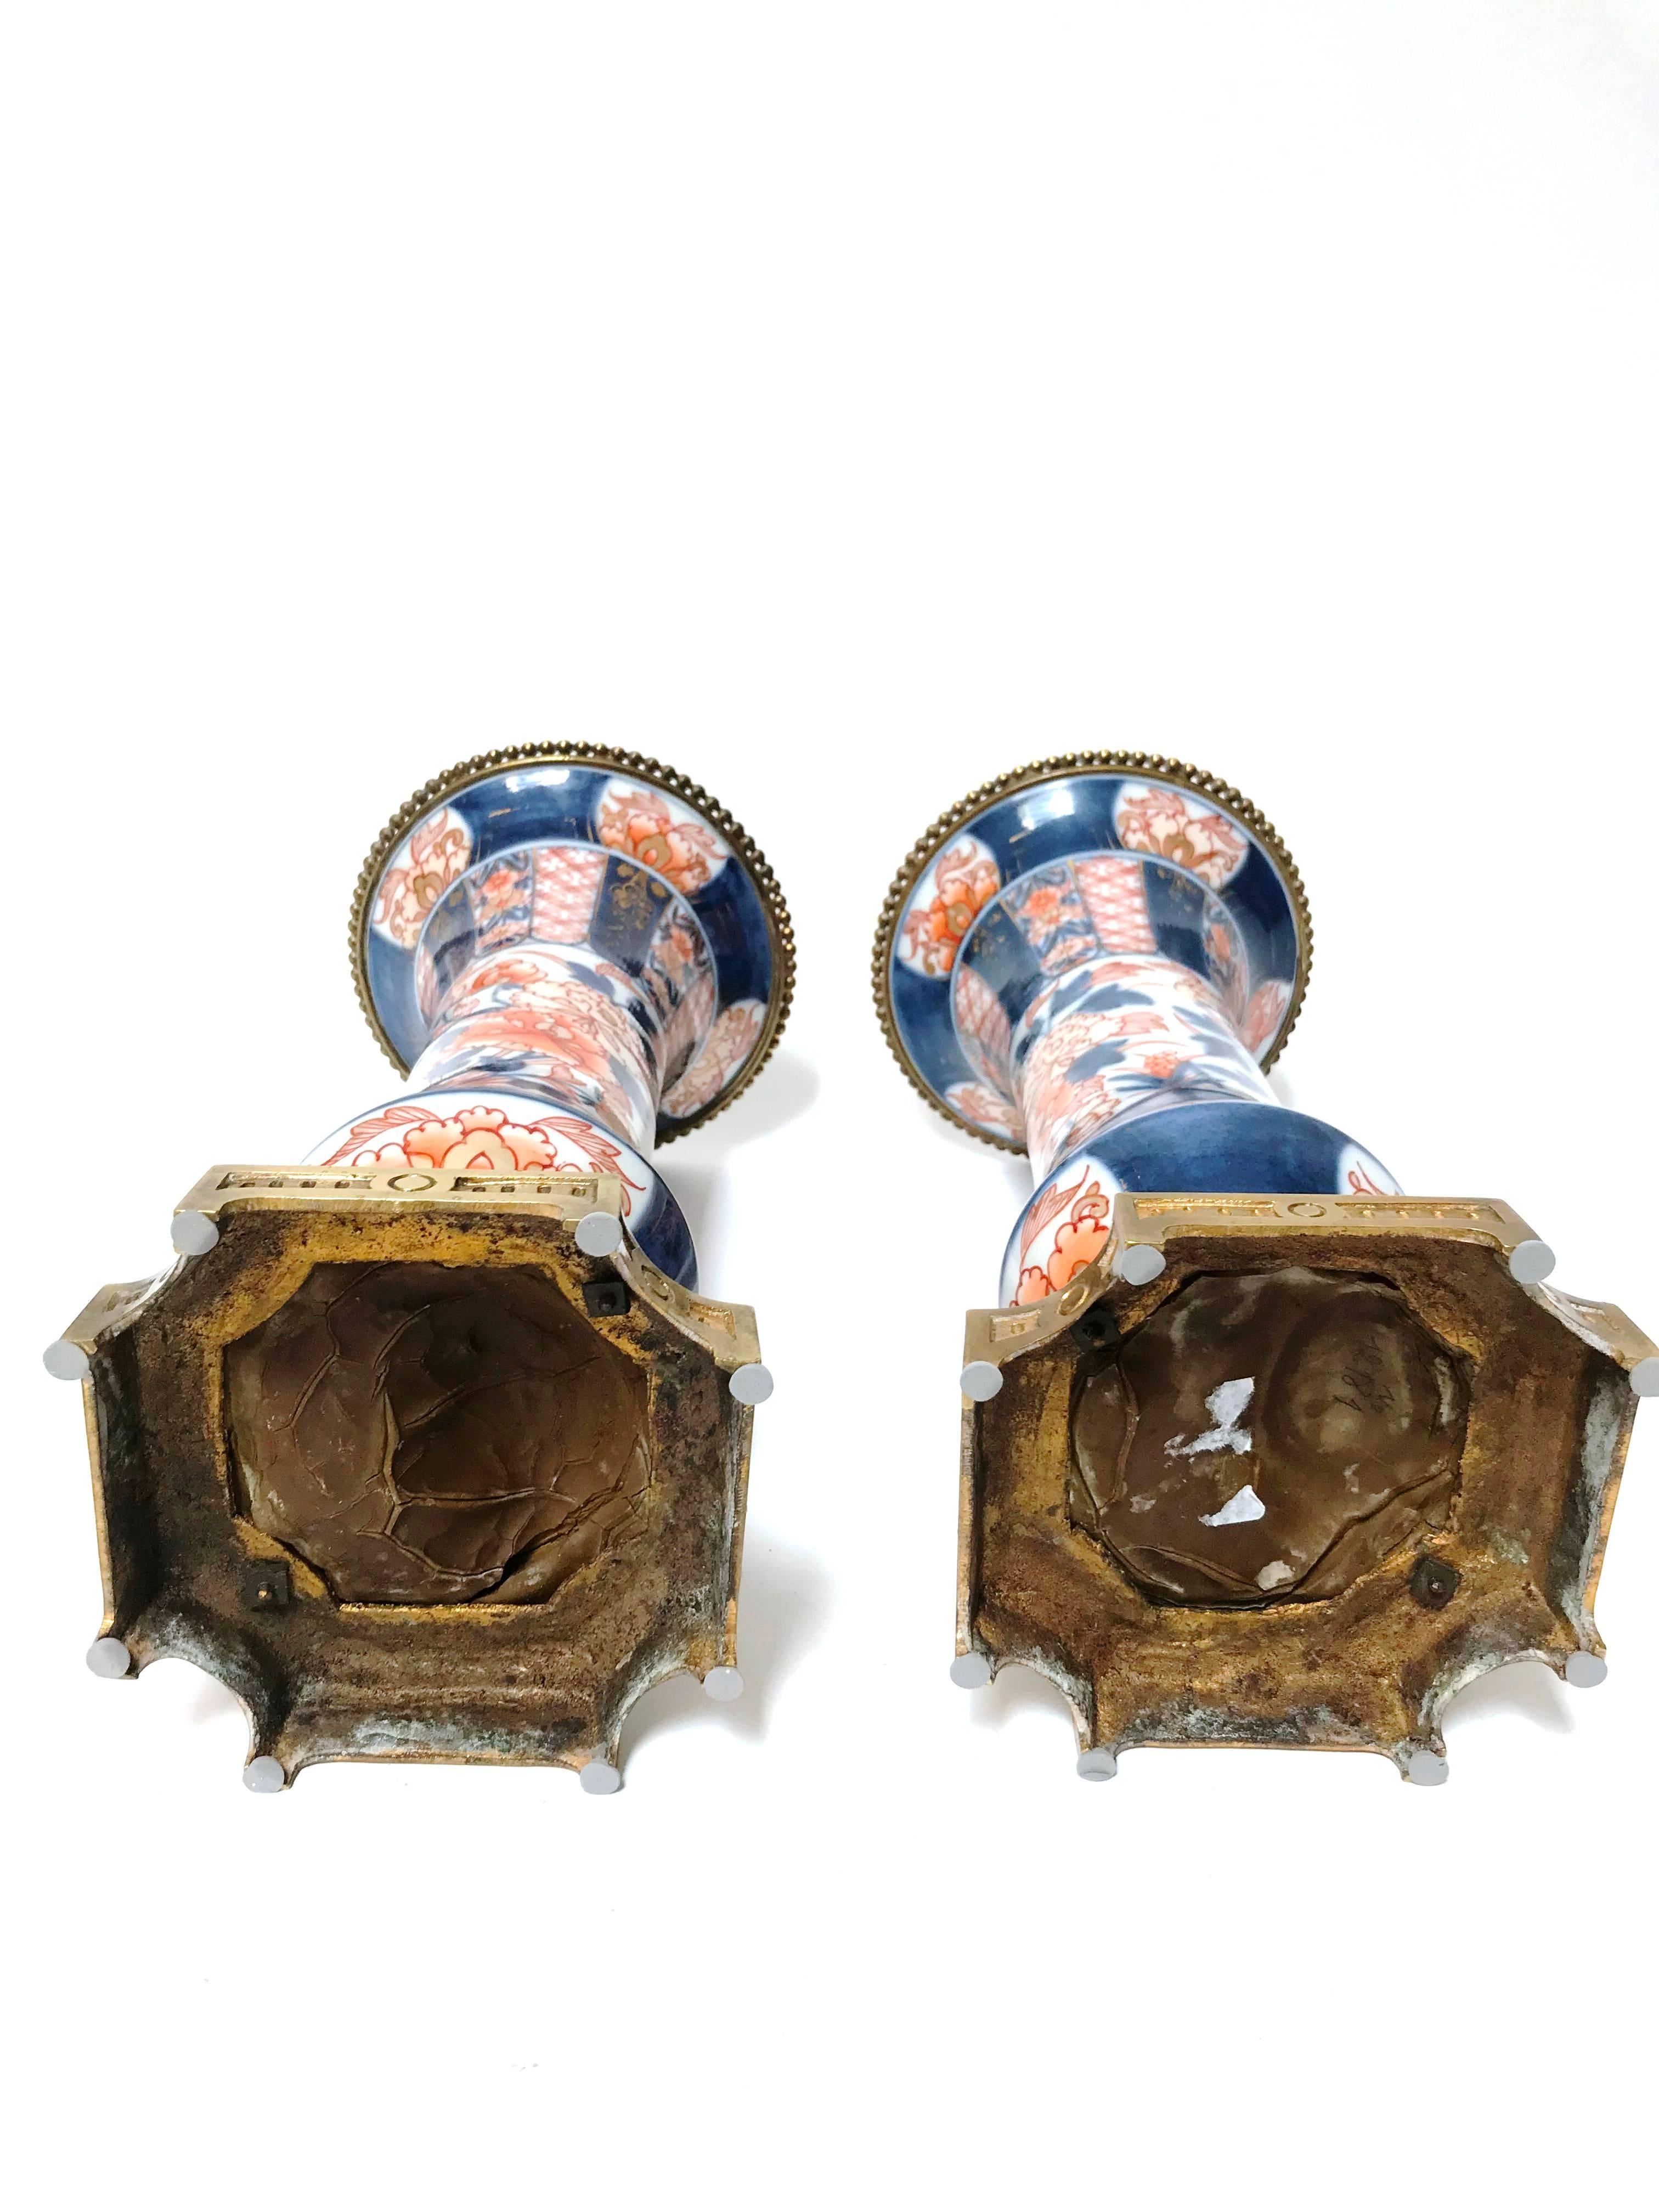 Pair of Early 19th Century Ormolu Mounted Japanese Imari Porcelain Vases For Sale 5